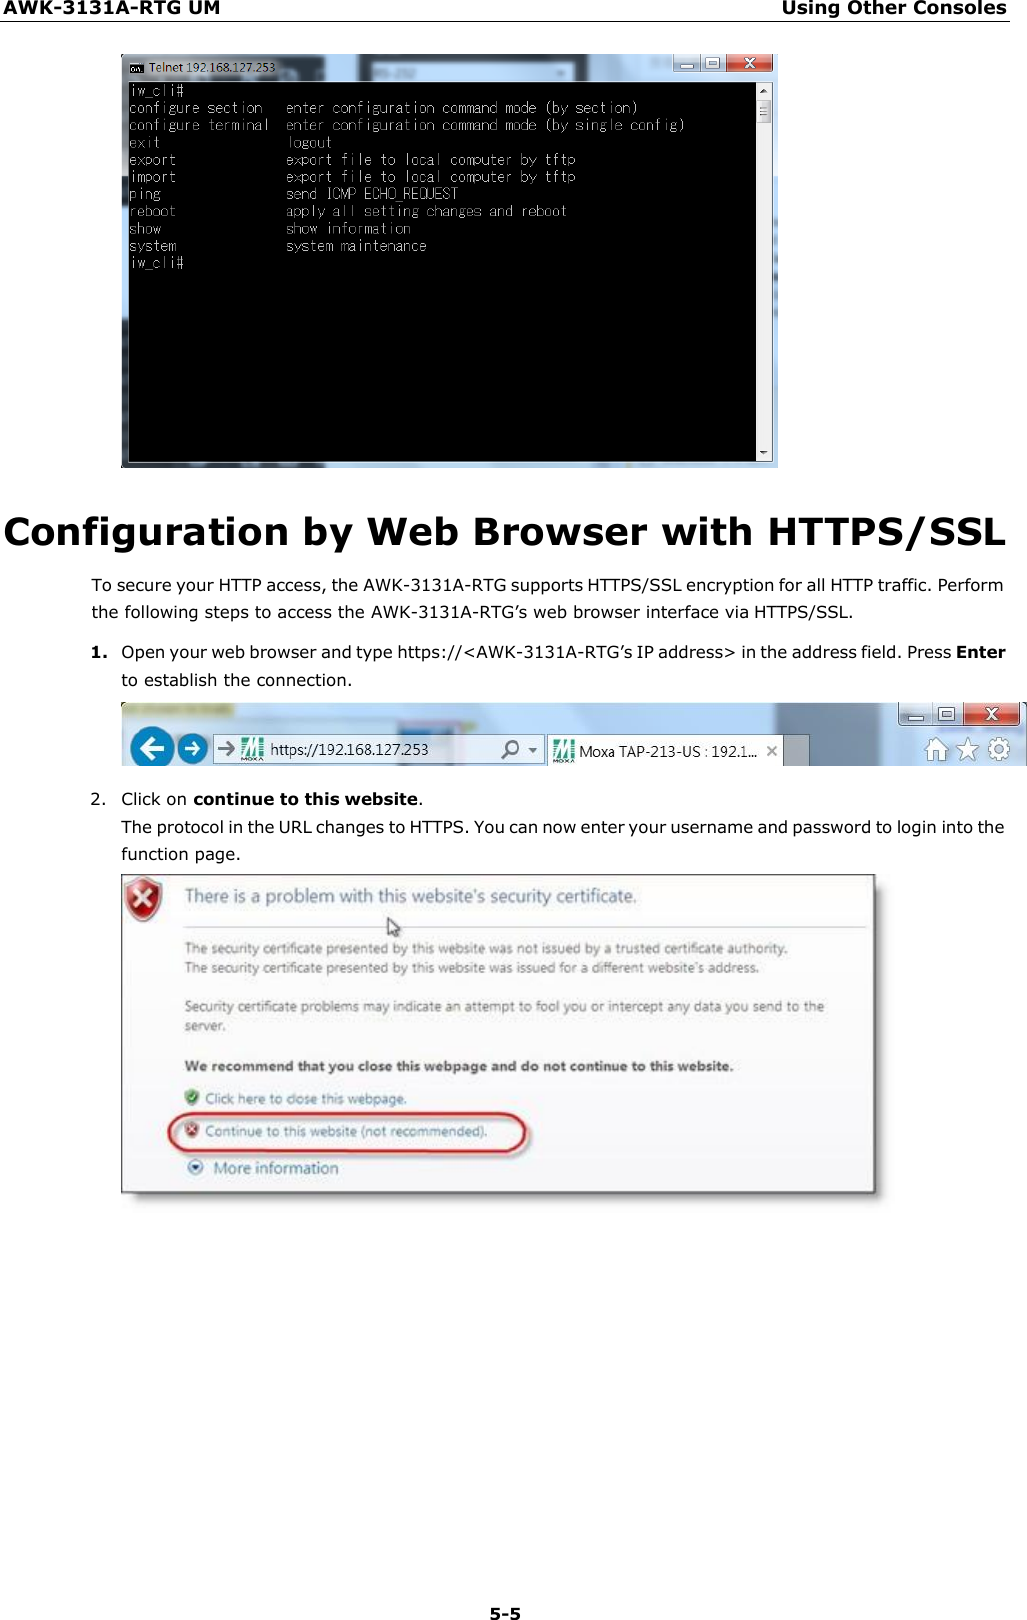 AWK-3131A-RTG UM Using Other Consoles 5-5      Configuration by Web Browser with HTTPS/SSL To secure your HTTP access, the AWK-3131A-RTG supports HTTPS/SSL encryption for all HTTP traffic. Perform the following steps to access the AWK-3131A-RTG’s web browser interface via HTTPS/SSL. 1. Open your web browser and type https://&lt;AWK-3131A-RTG’s IP address&gt; in the address field. Press Enter to establish the connection.  2. Click on continue to this website. The protocol in the URL changes to HTTPS. You can now enter your username and password to login into the function page. 